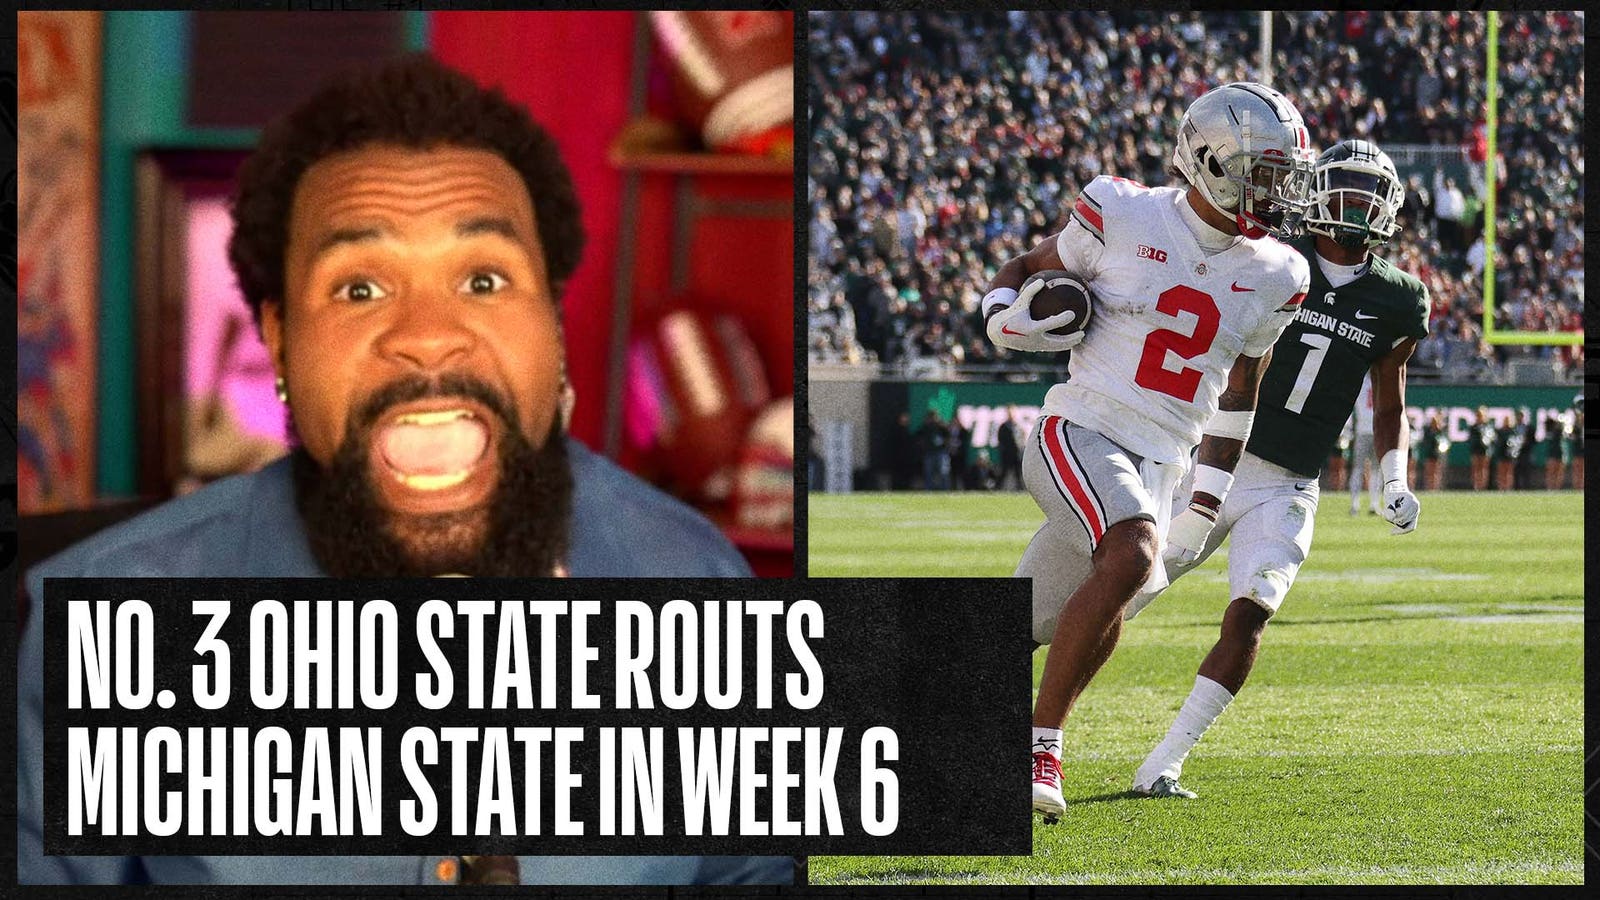 Ohio State routs Michigan State in Week 6